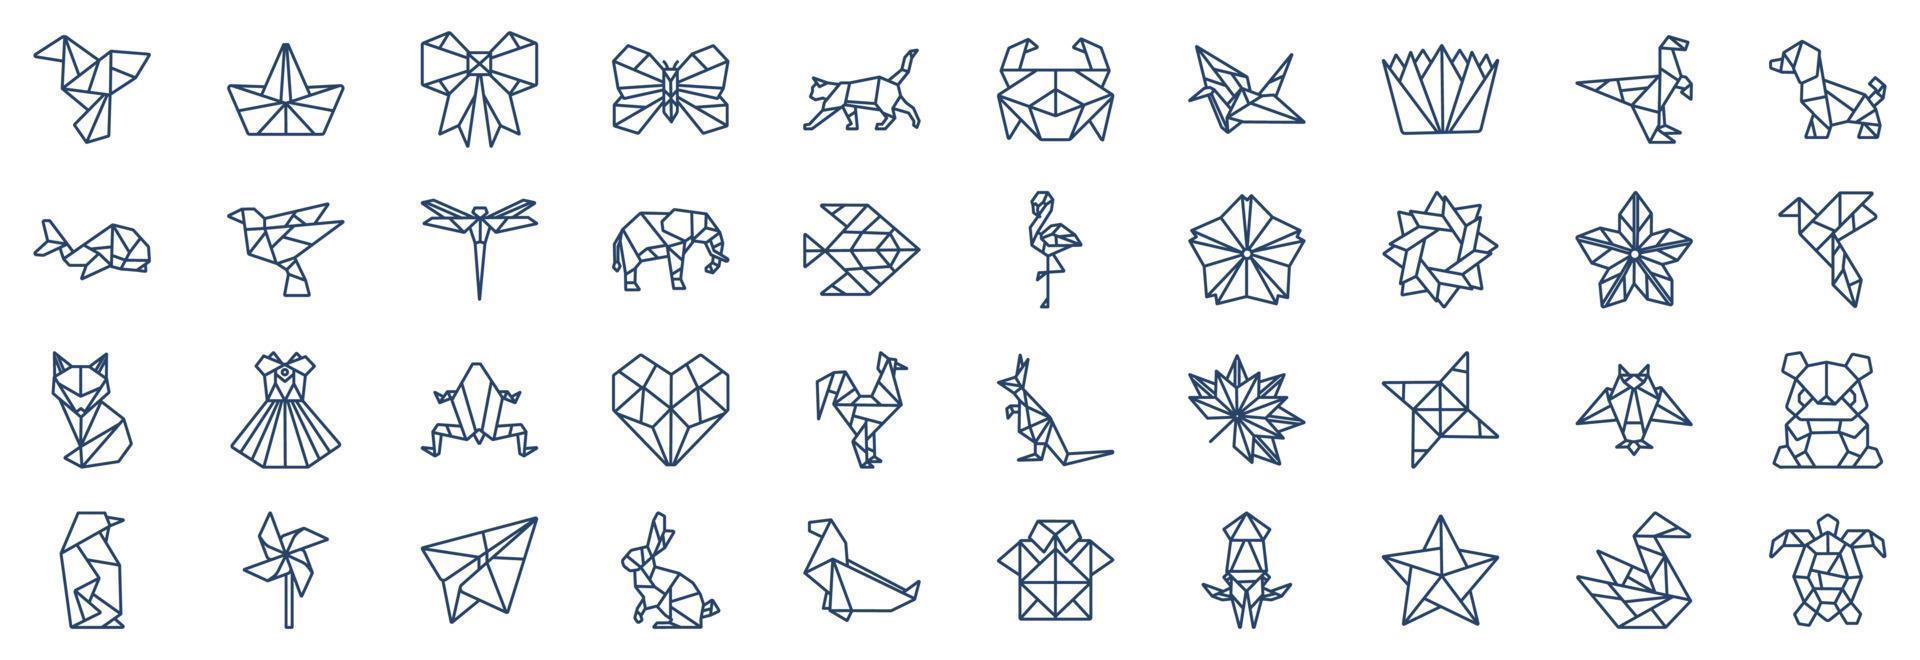 Collection of icons related to Origami, including icons like Bird, Boat, Butterfly, Cat and more. vector illustrations, Pixel Perfect set